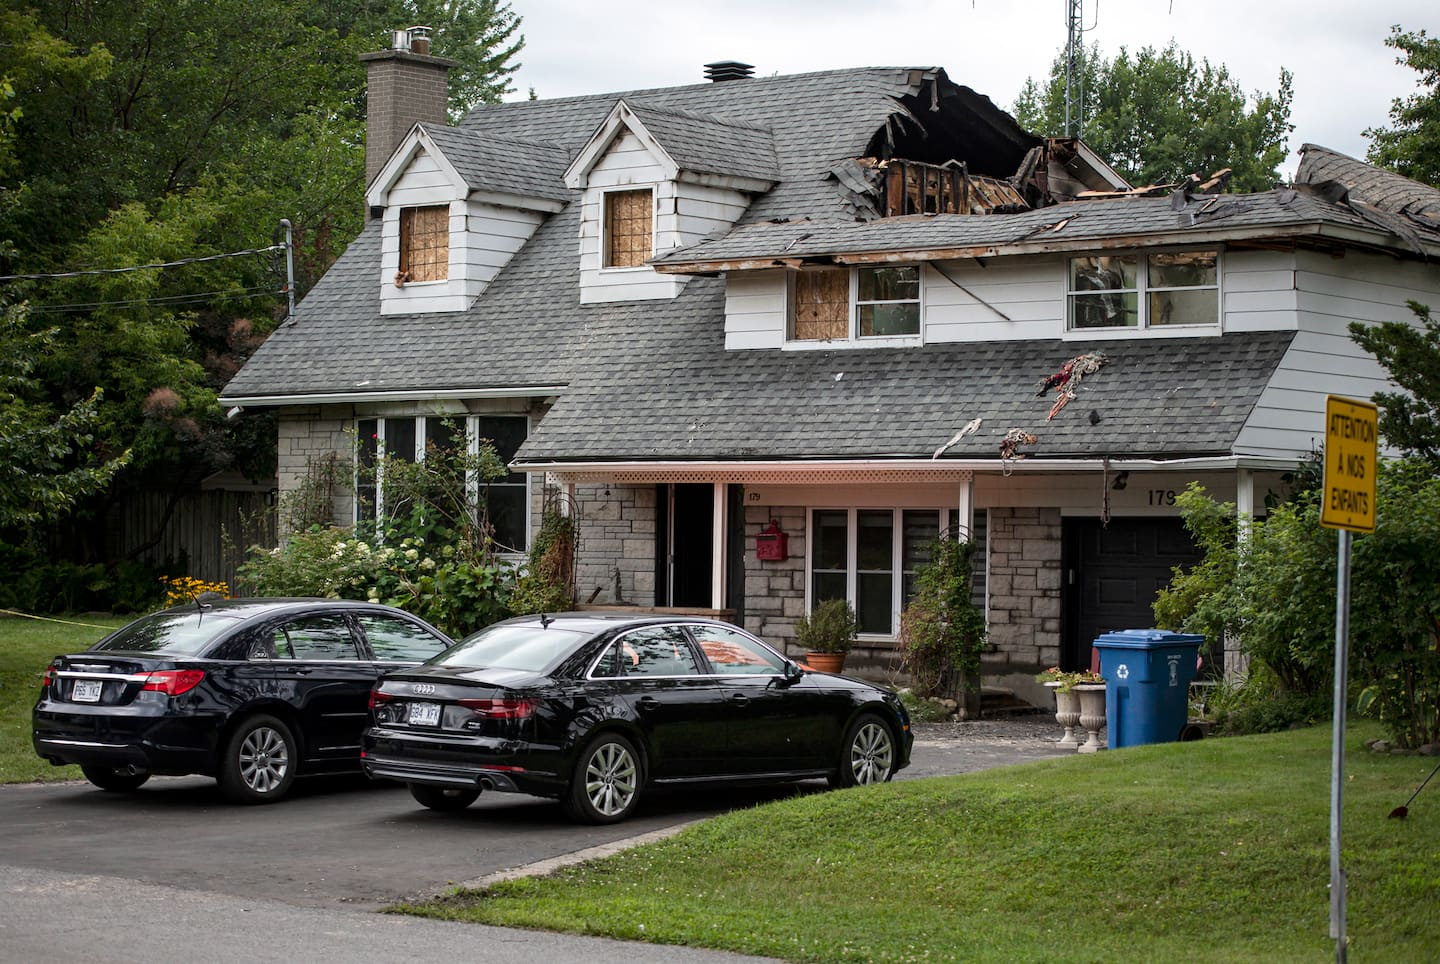 Hit by lightning: a house total loss in two seconds